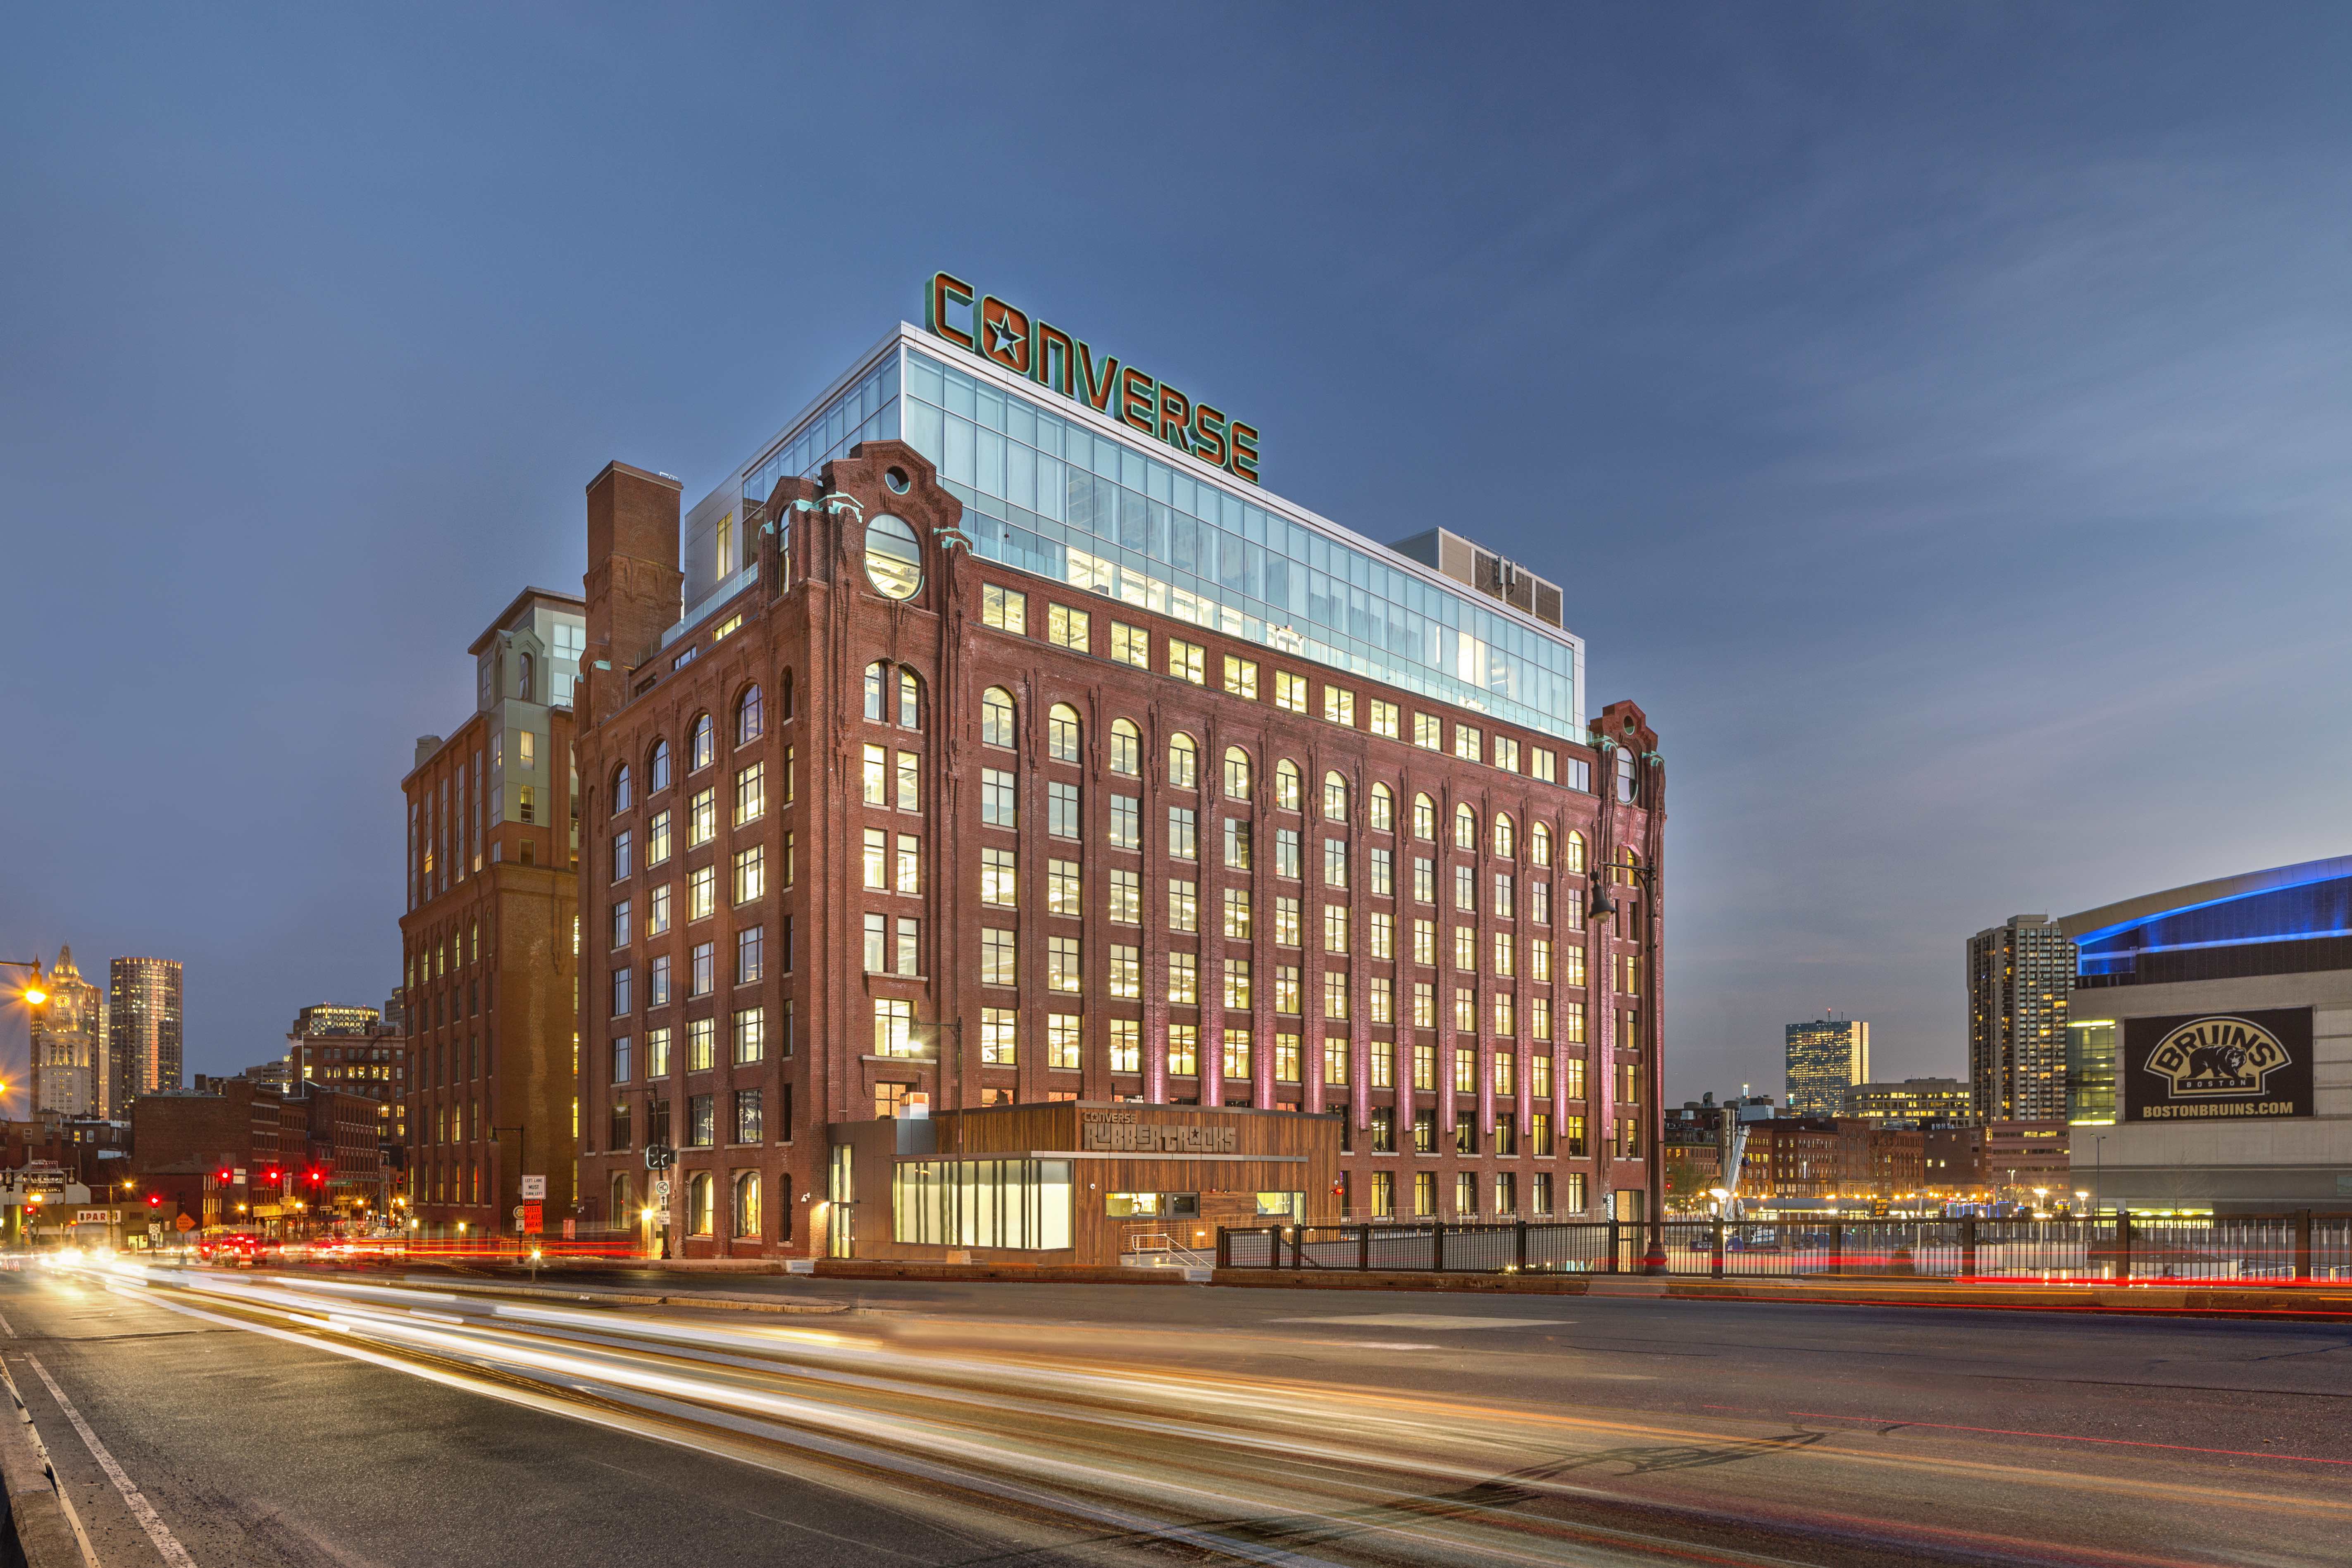 TAT is known as a national leader in historic preservation and adaptive reuse, with a portfolio of award-winning projects such as Boston's Lovejoy Wharf (Photo Credit: Gustav Hoiland)